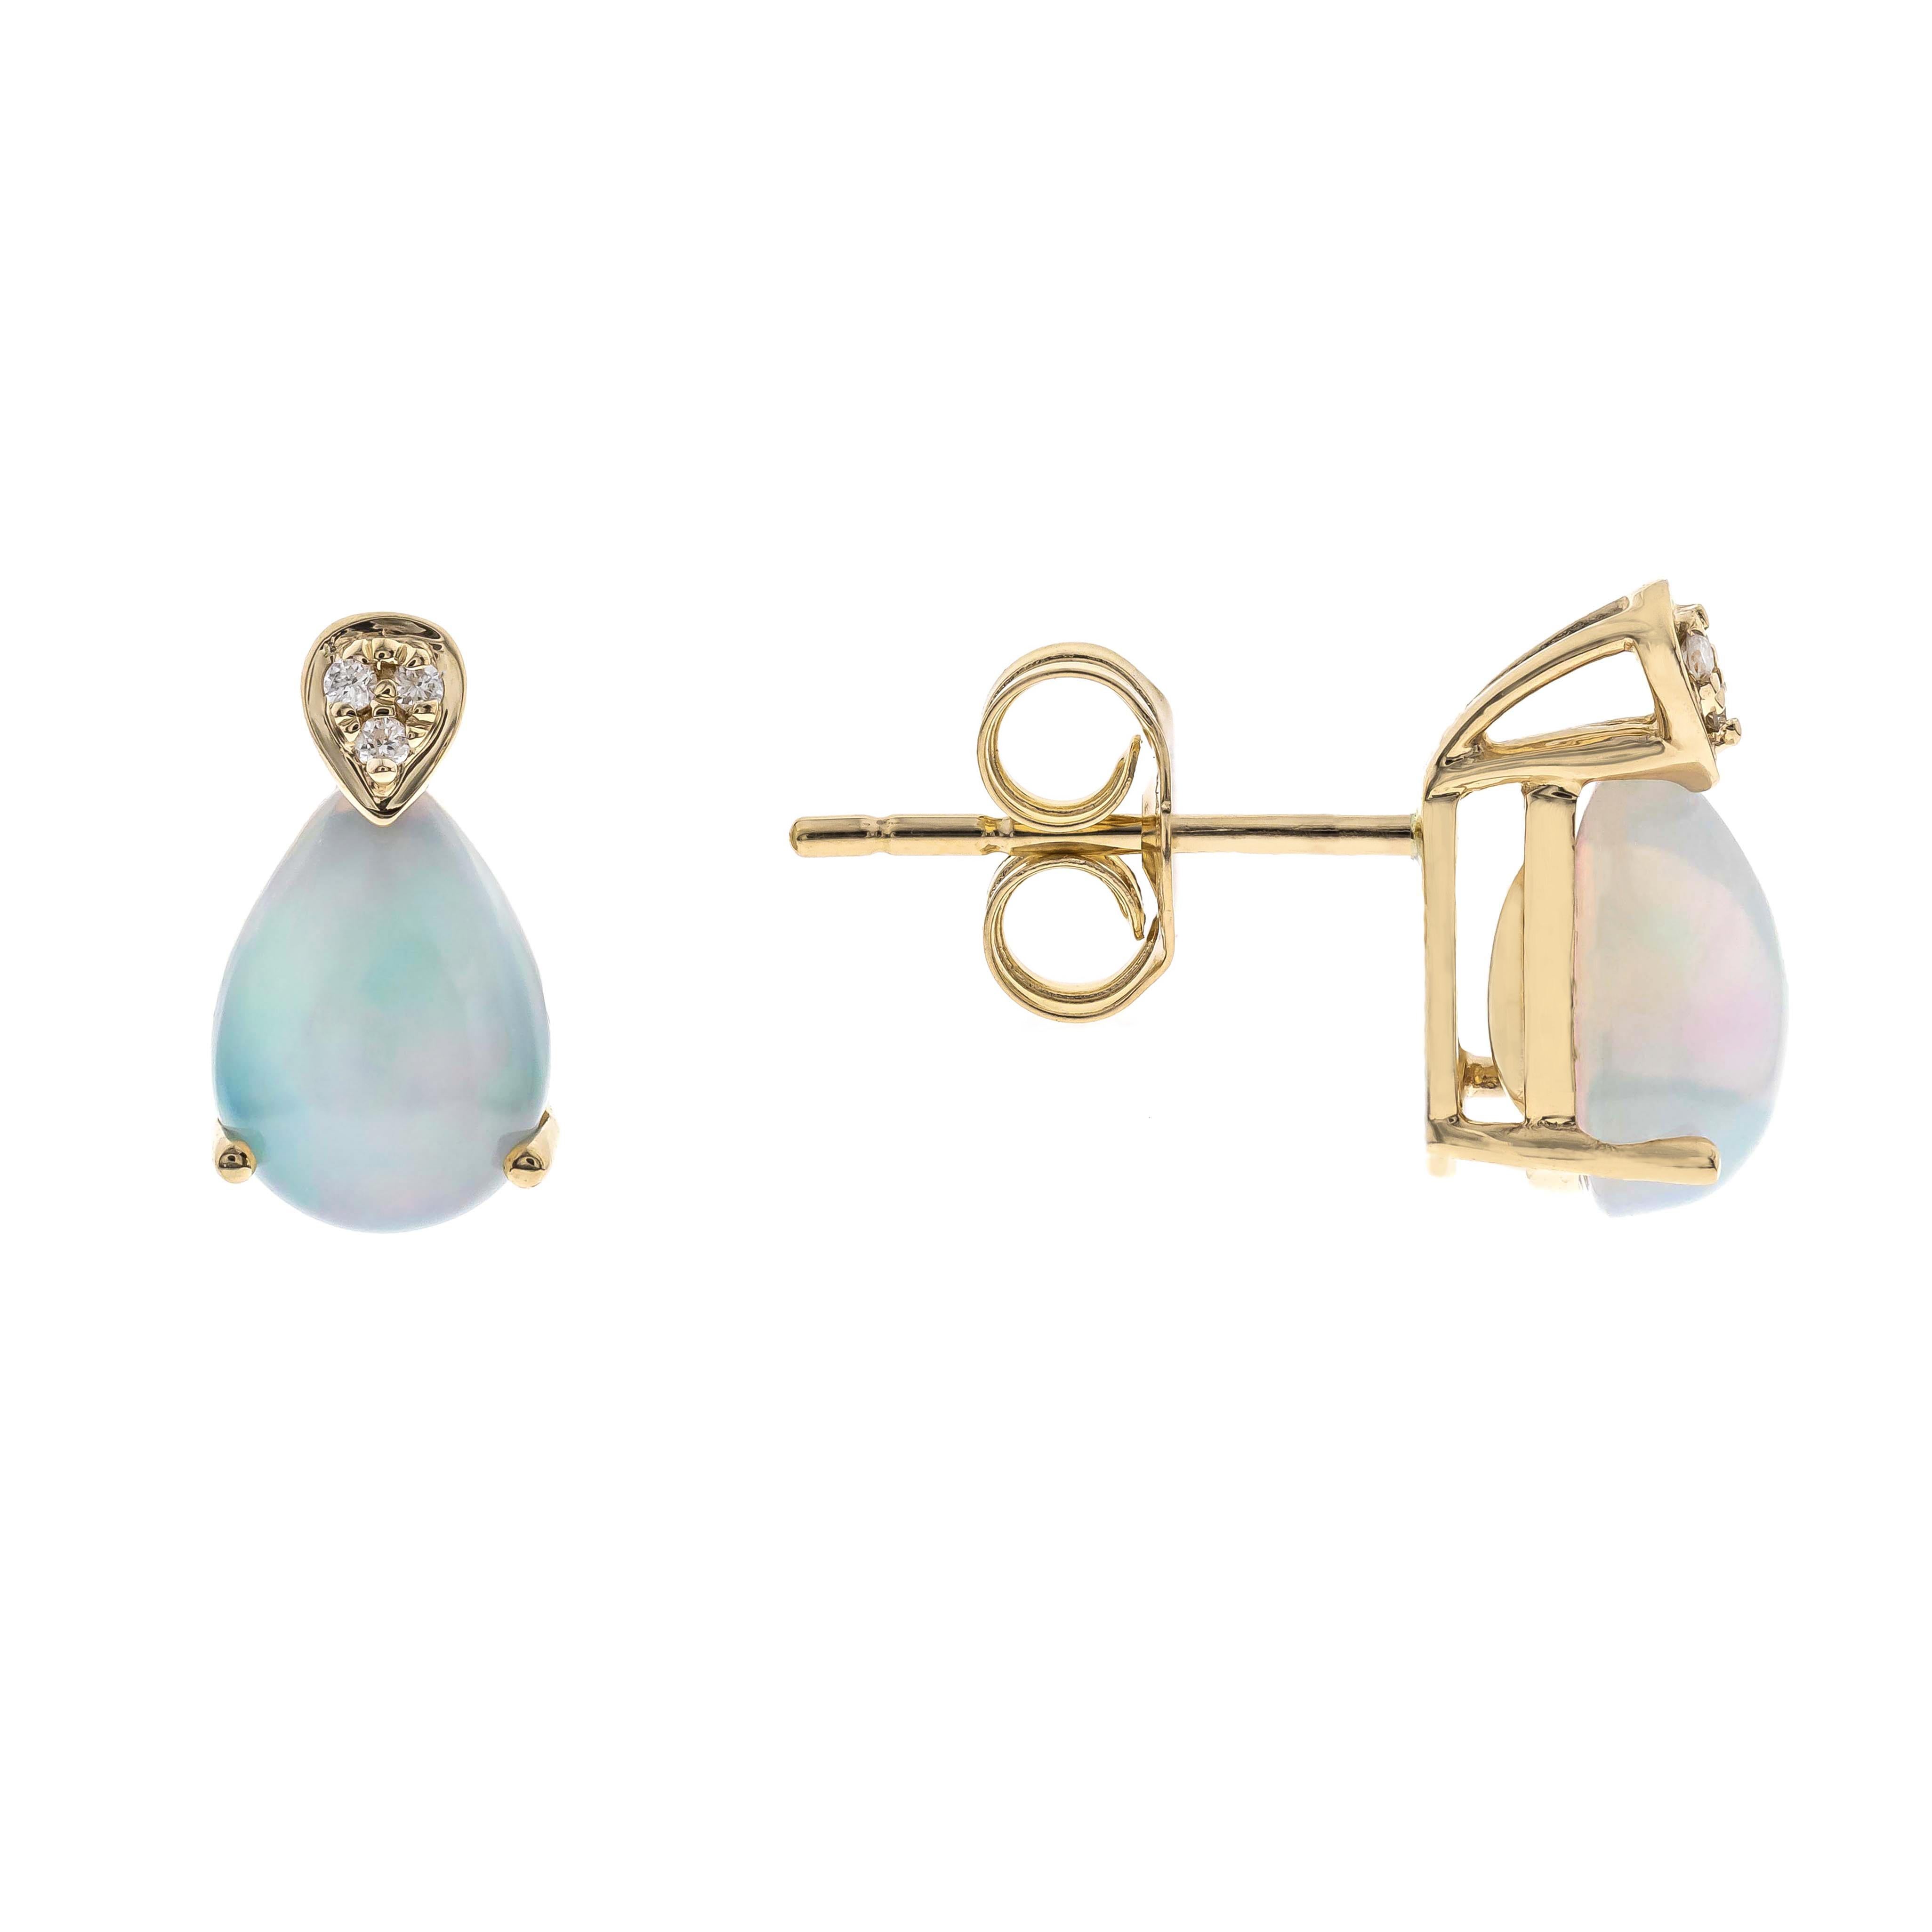 Decorate yourself in elegance with this Earring is crafted from 10-karat Yellow Gold by Gin & Grace Earring. This Earring is made up of 6x8 mm Pear-cab (2 pcs) 1.33 carat Ethiopian Opal and Round-cut White Diamond (6 pcs) 0.02 carat. This Earring is